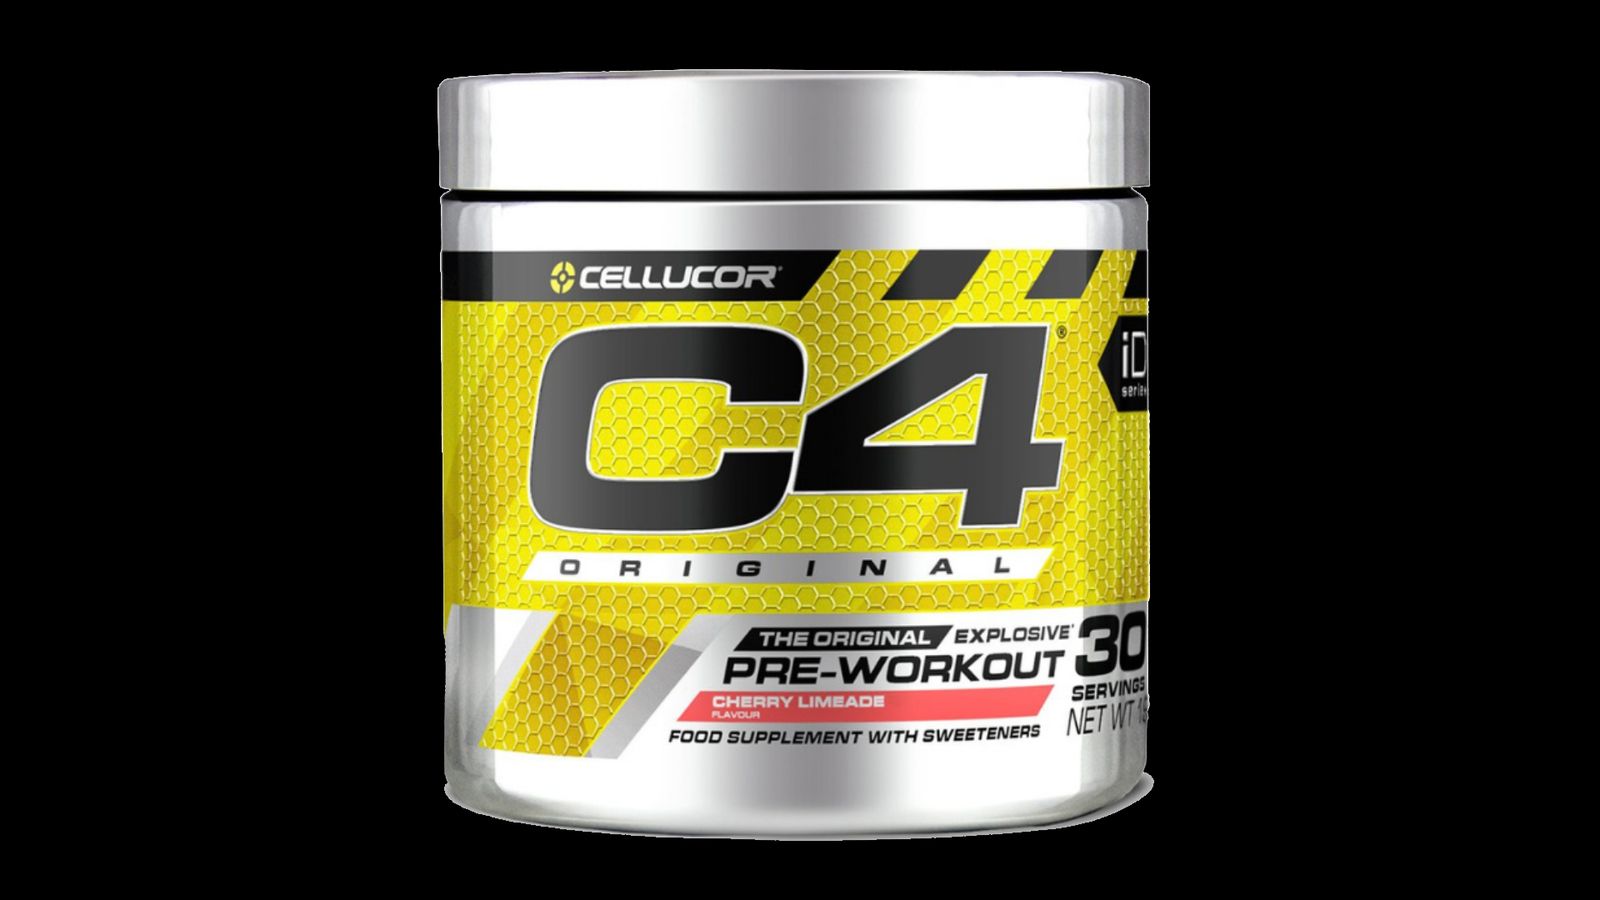 Cellucor C4 Original Pre-Workout product image of a silvery container with yellow and black labeling